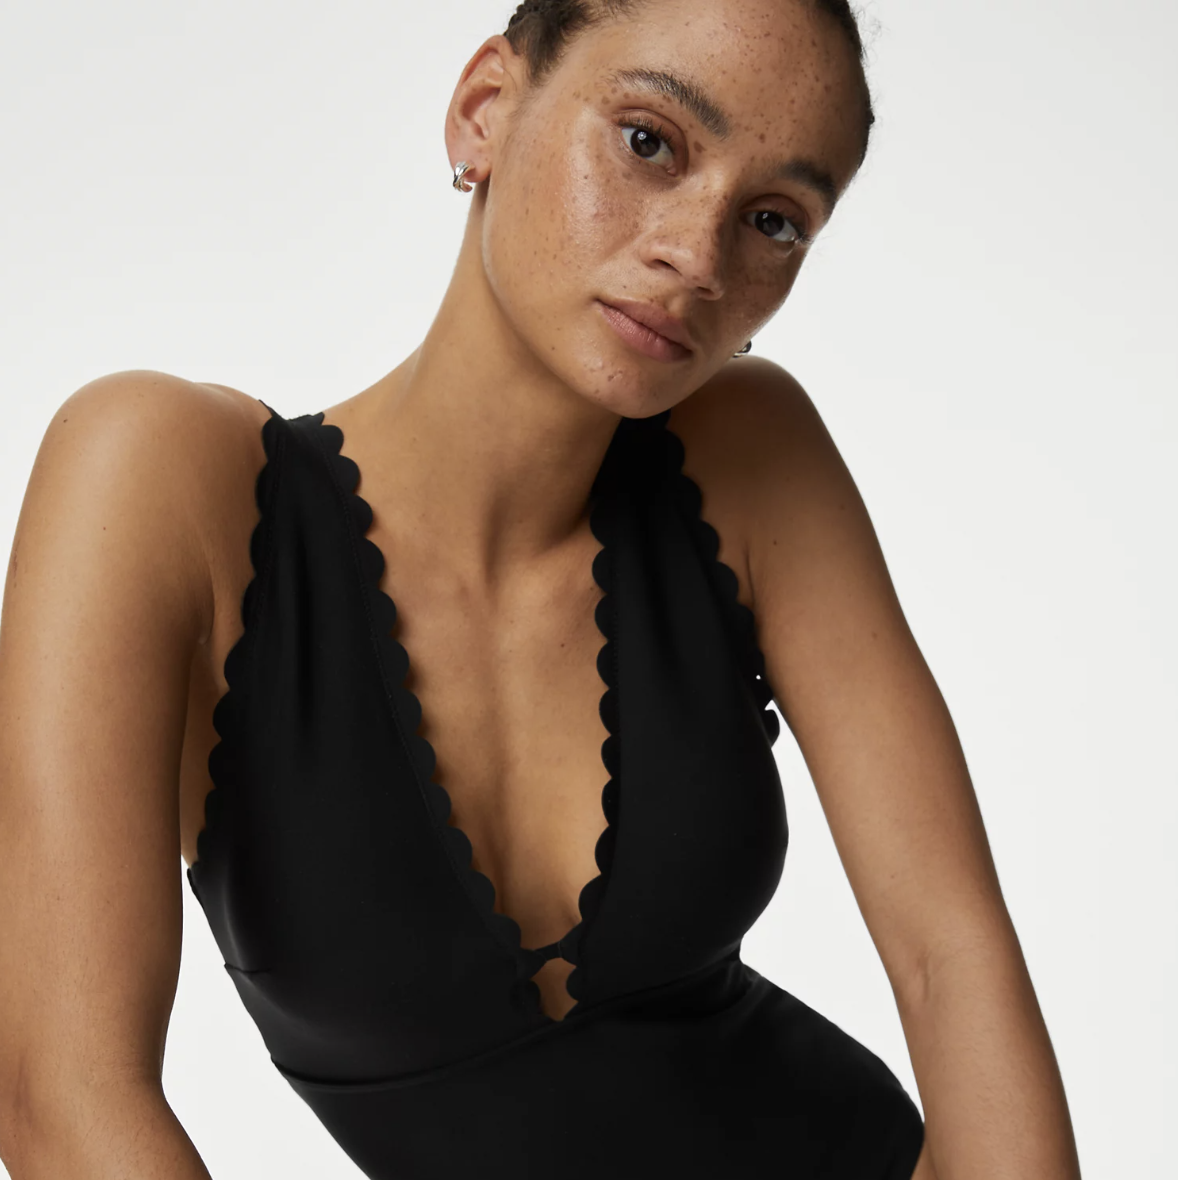 https://hips.hearstapps.com/hmg-prod/images/marks-spencer-swimsuit-65c0f7222d43e.png?crop=1.00xw:0.861xh;0,0&resize=1200:*